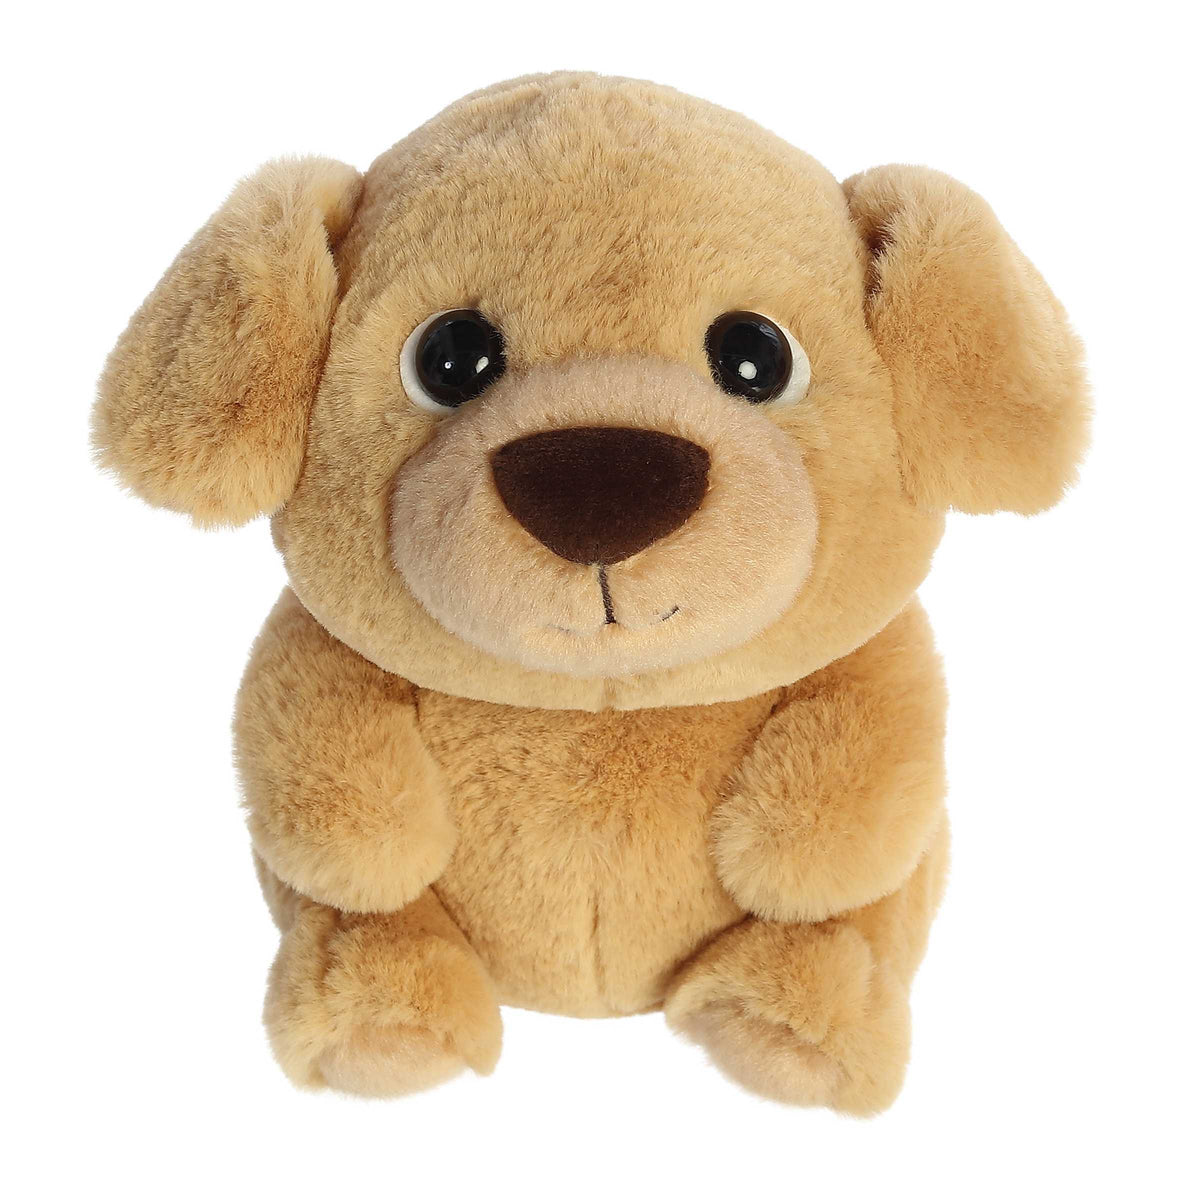 Adorable golden retriever puppy Stuffed animals with soft golden-brown fur, dark brown accents on its nose, and shiny eyes